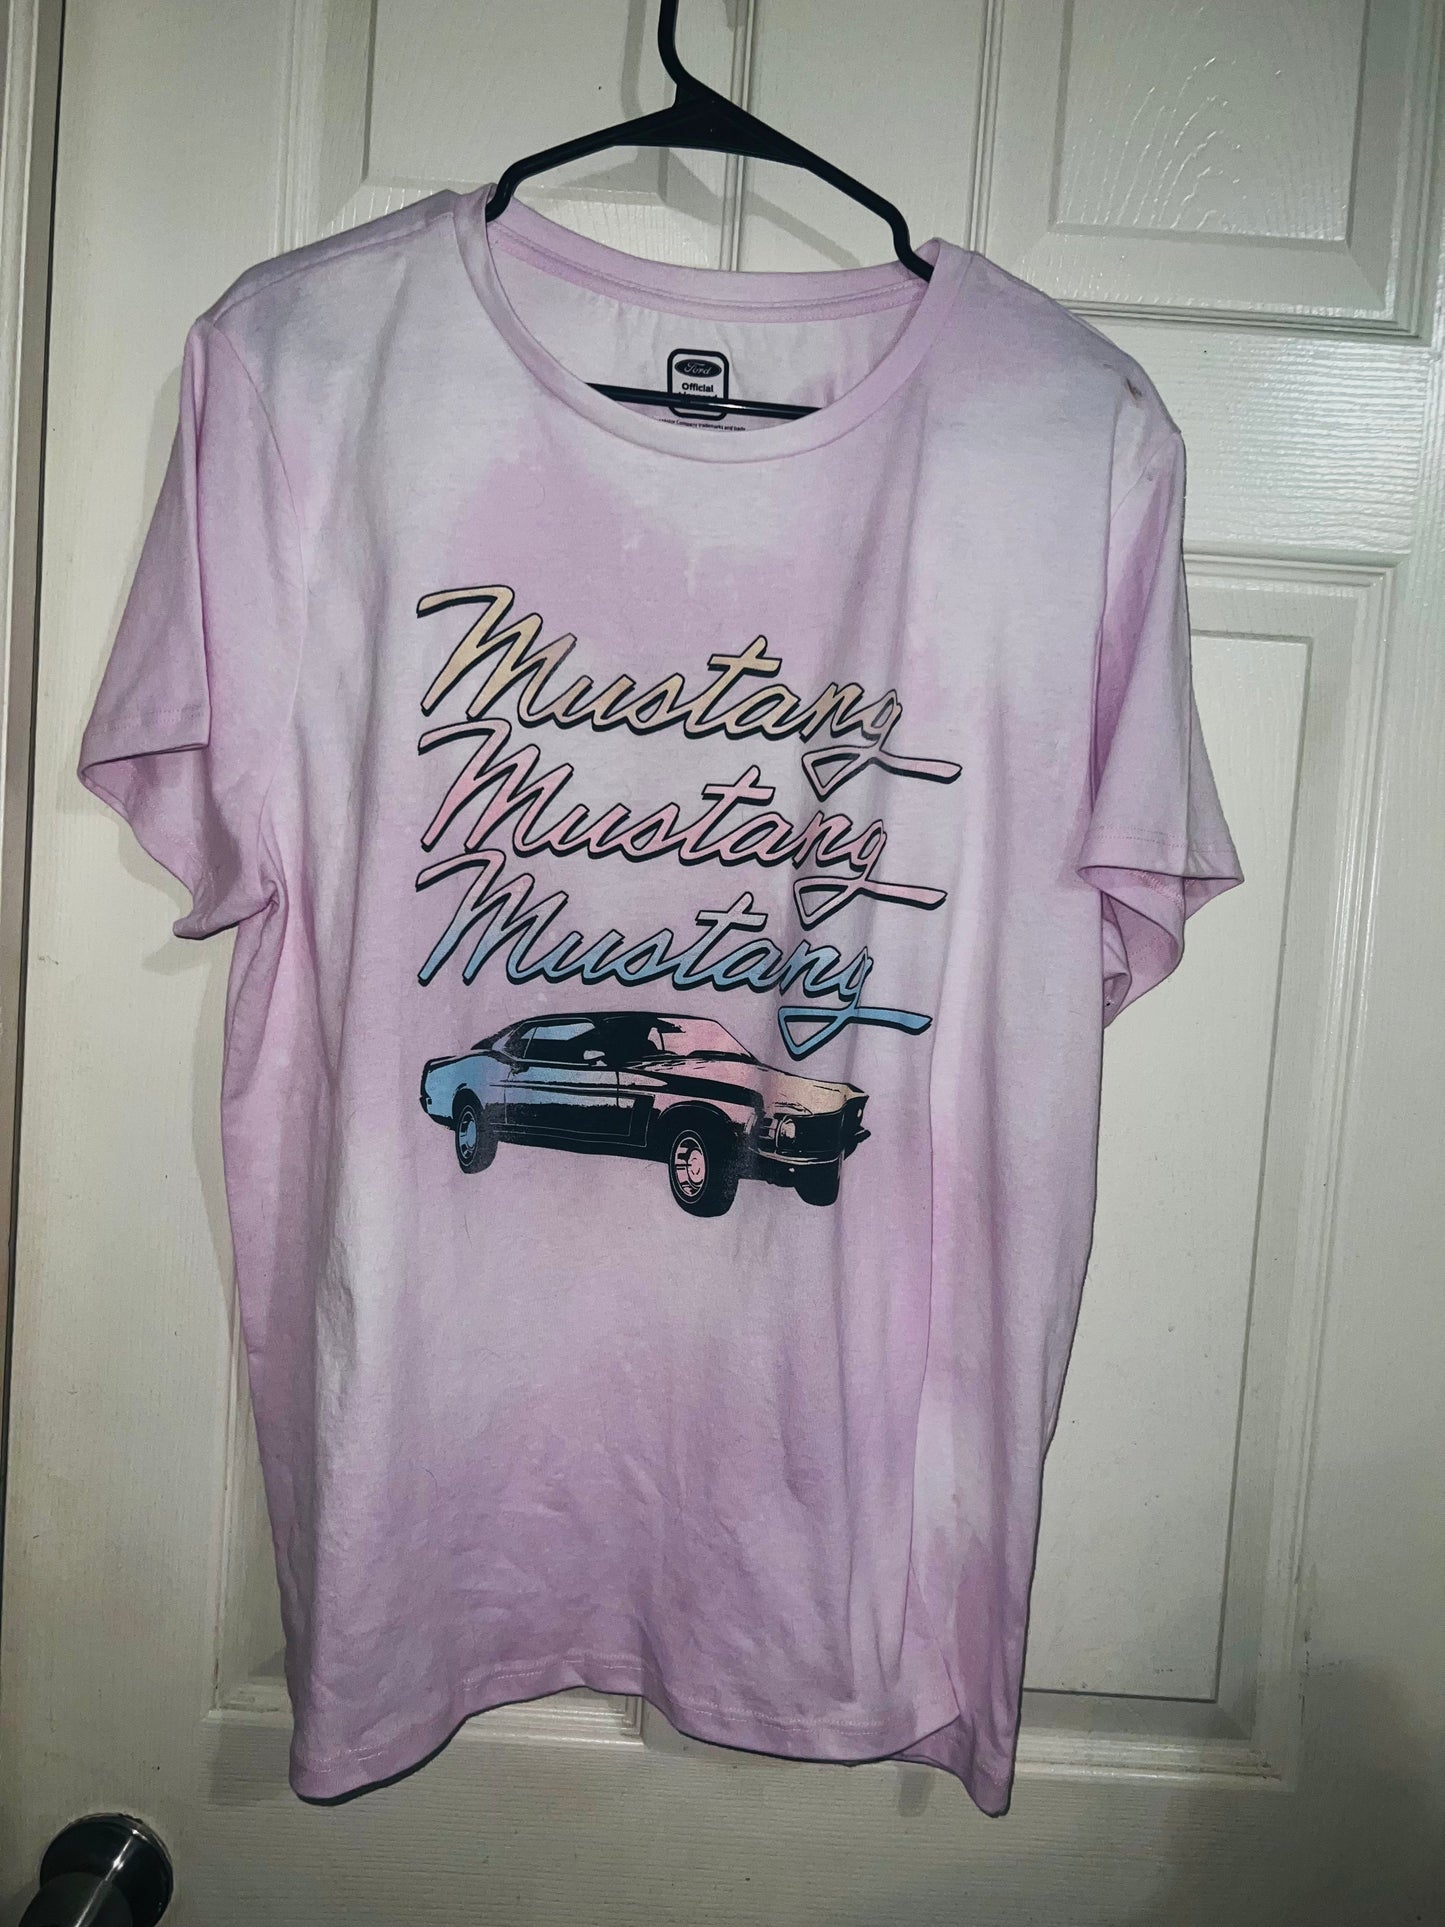 Bleached Mustang Oversized Distressed Tee